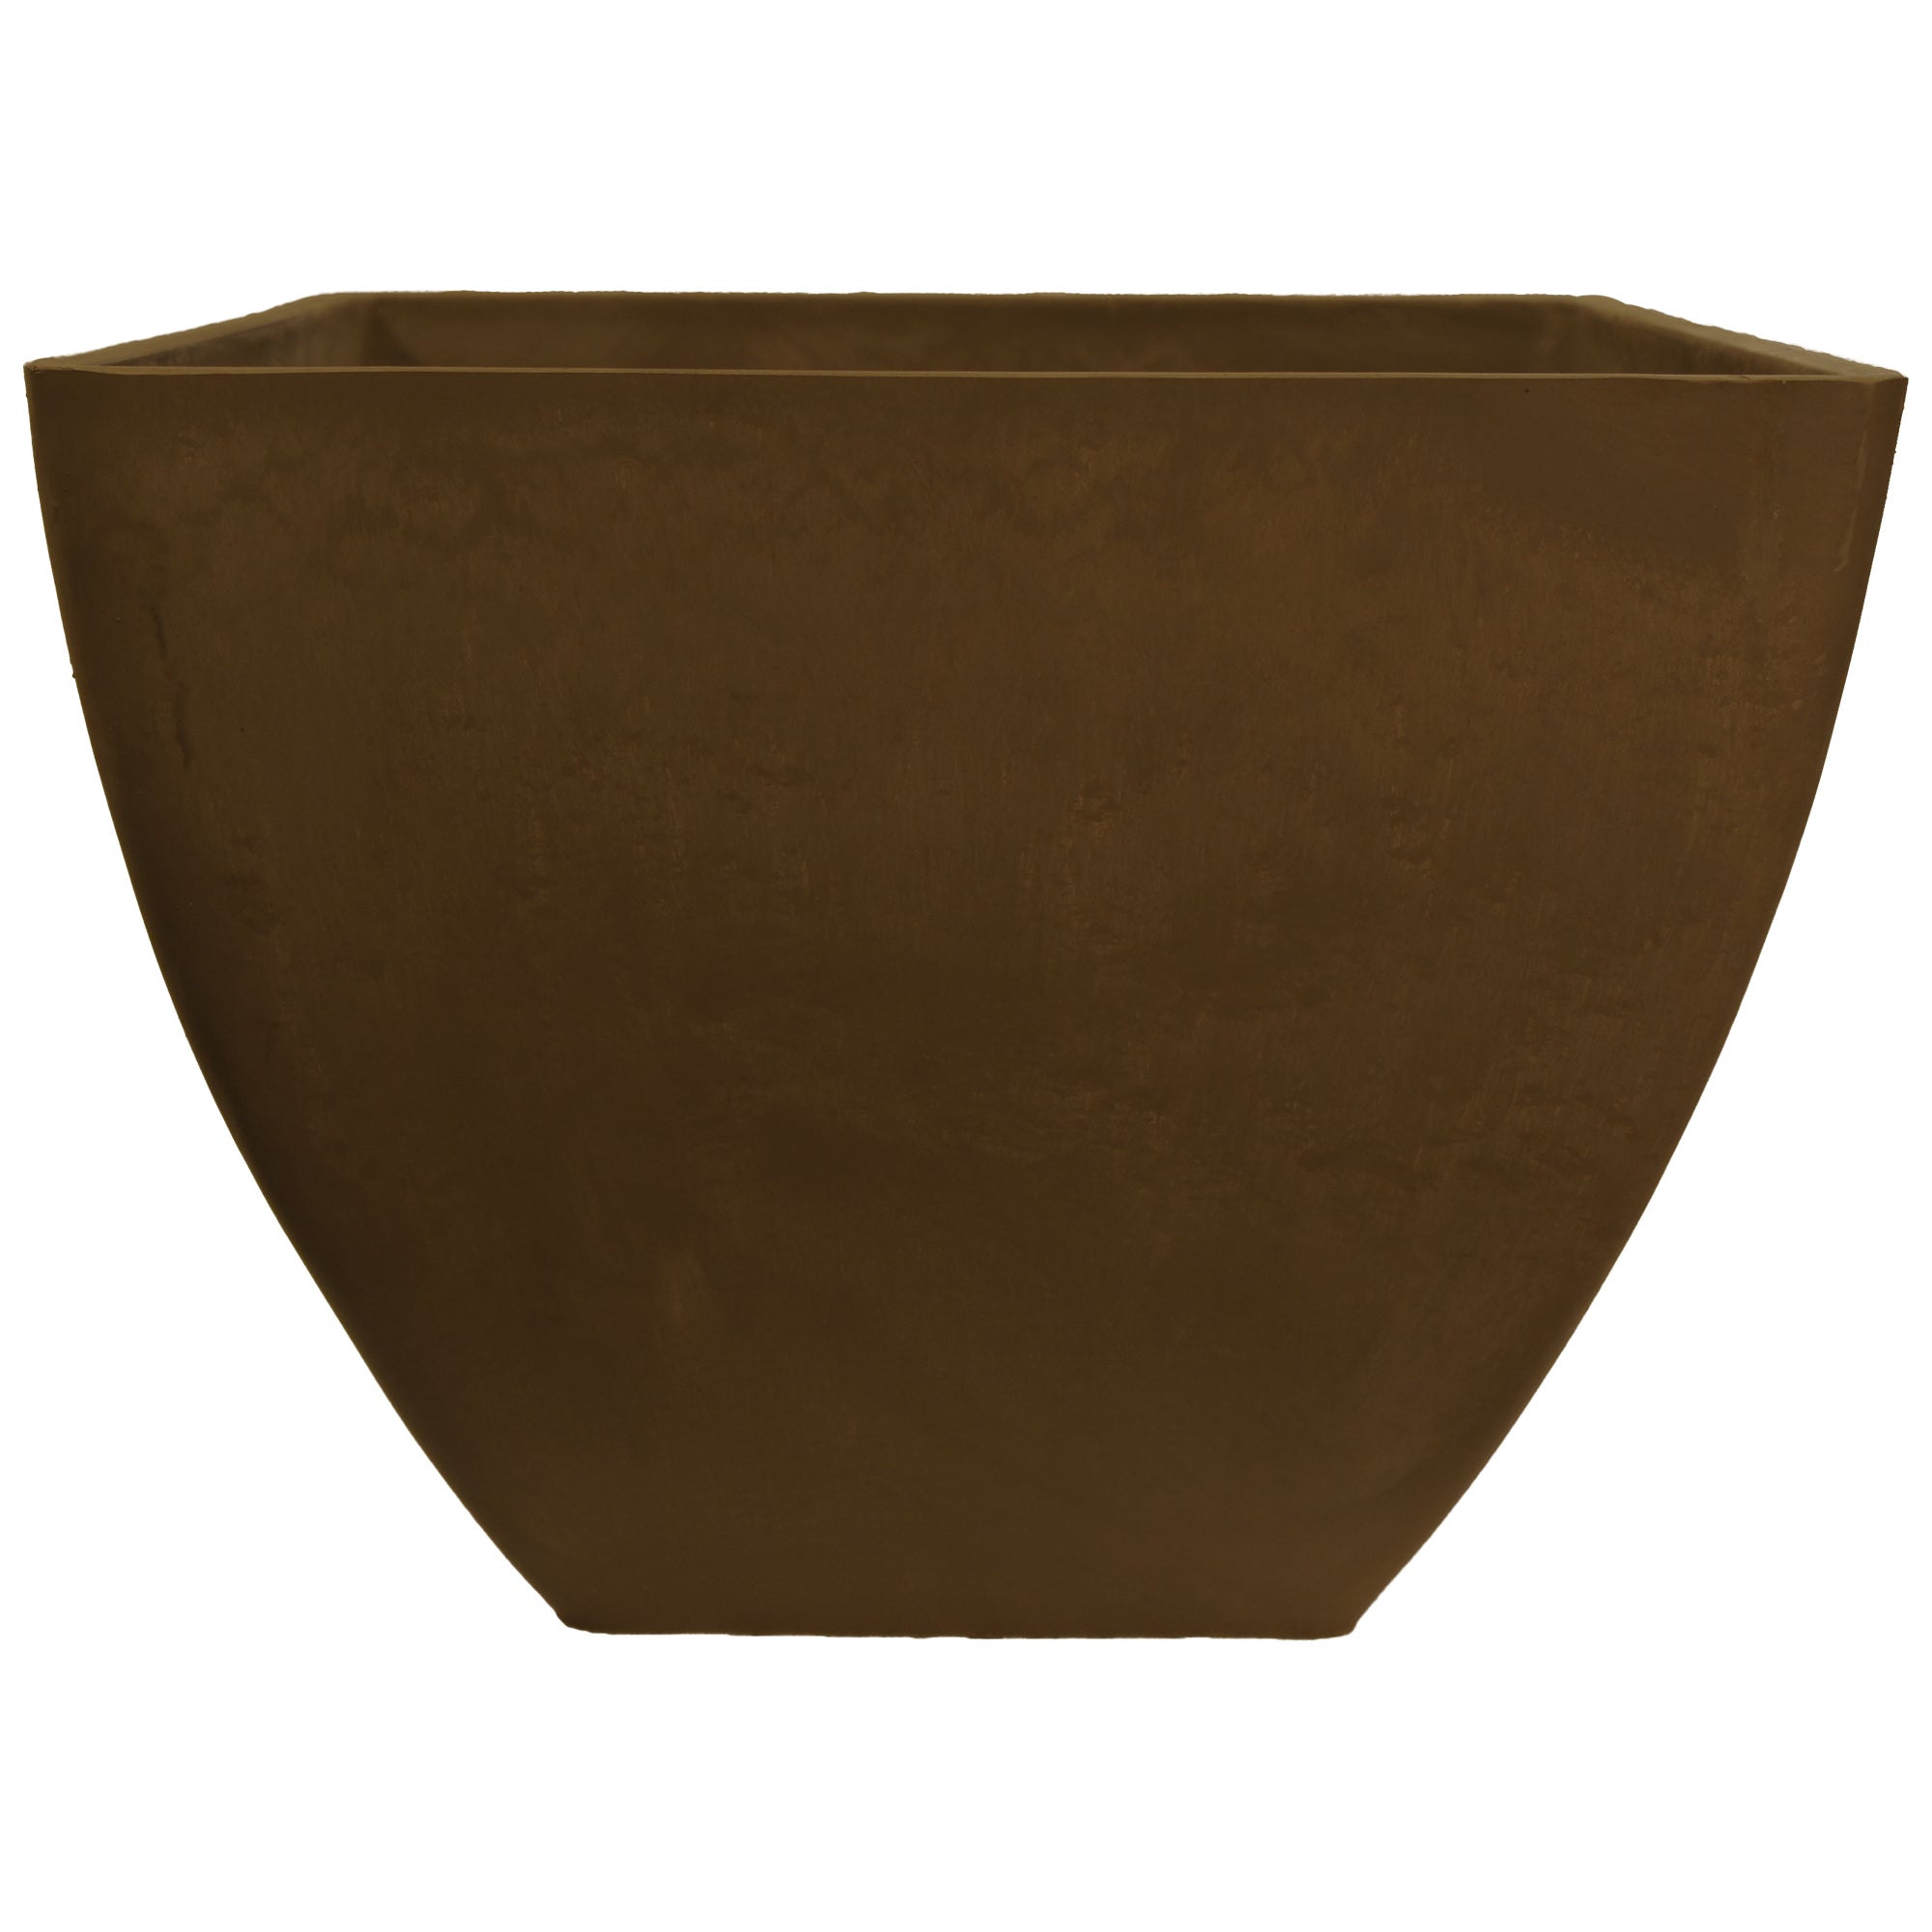 16 inch square planter in oak on a white background